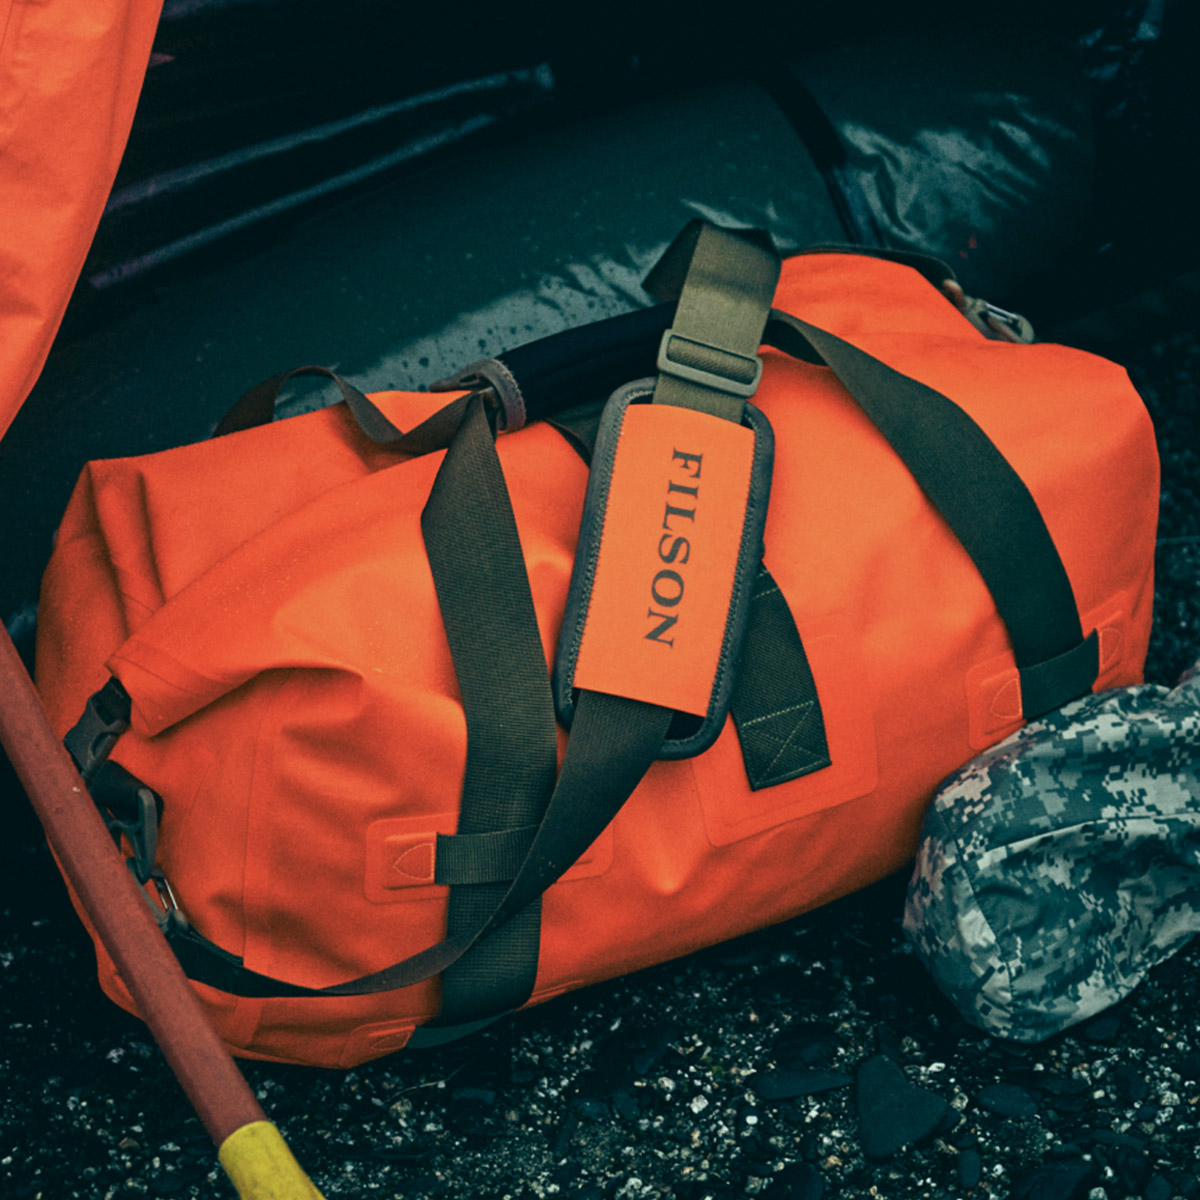 Filson Dry Duffle Bag Medium Flame, keeps your gear dry in any weather